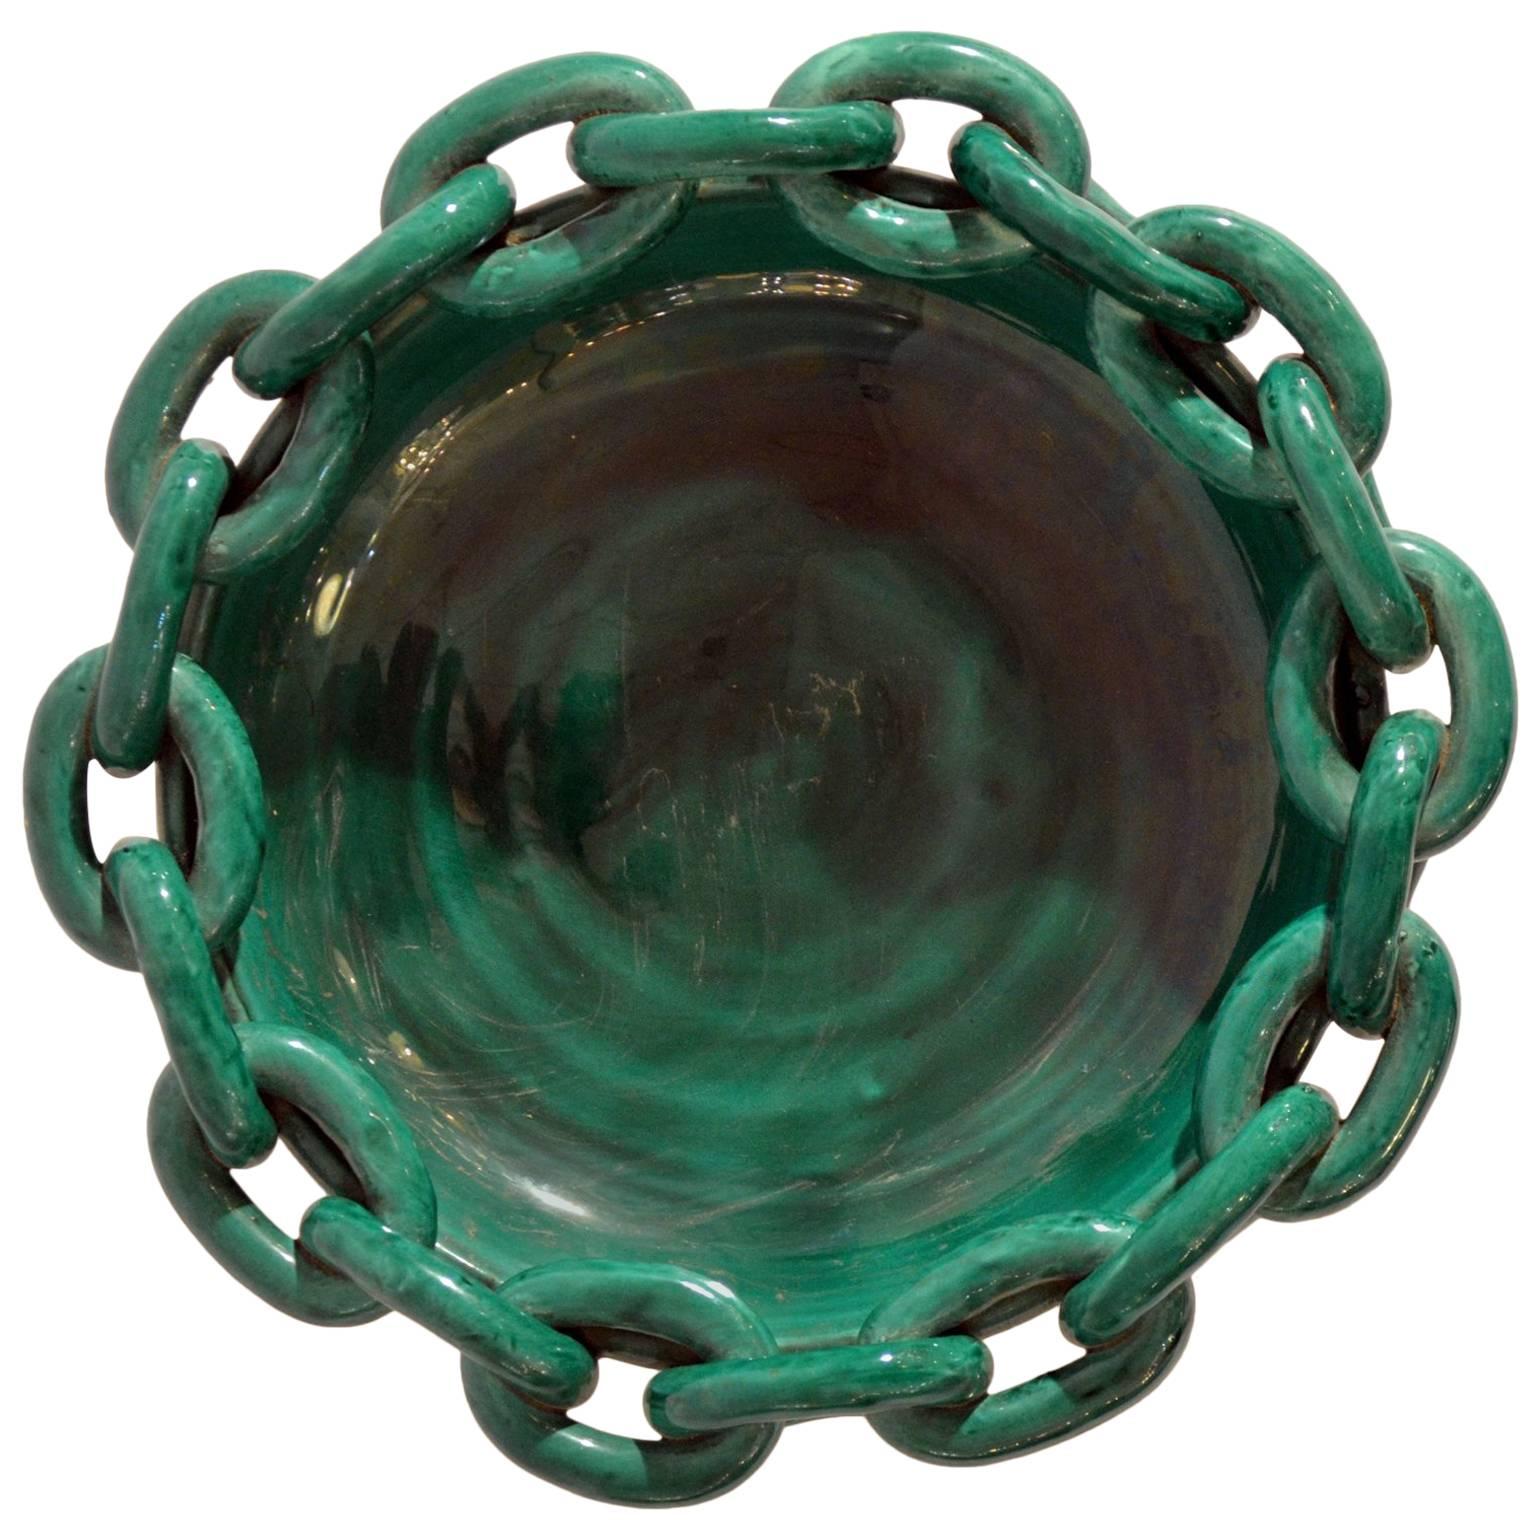 1950s Bowl in Emerald Green Ceramic with Chain Edge by Vallauris France